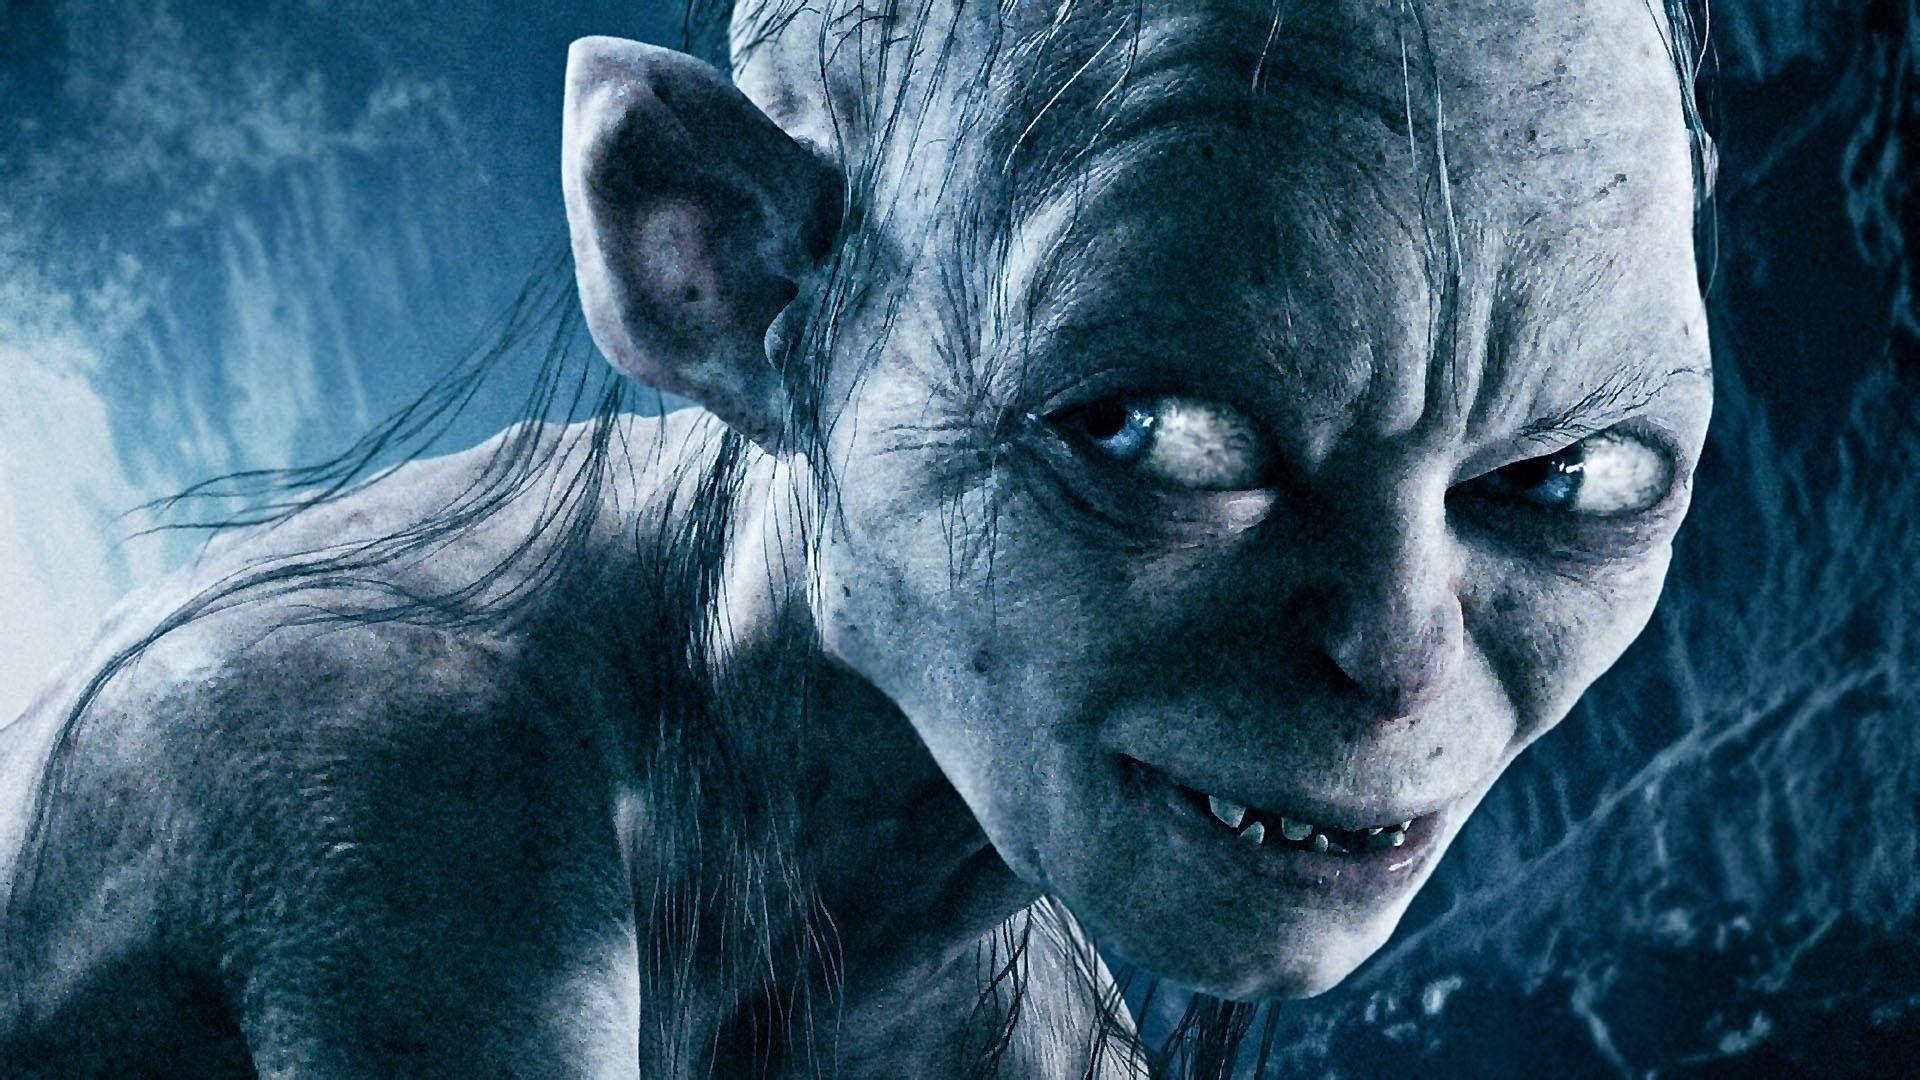 gollum from lord of the rings is he a hobbit